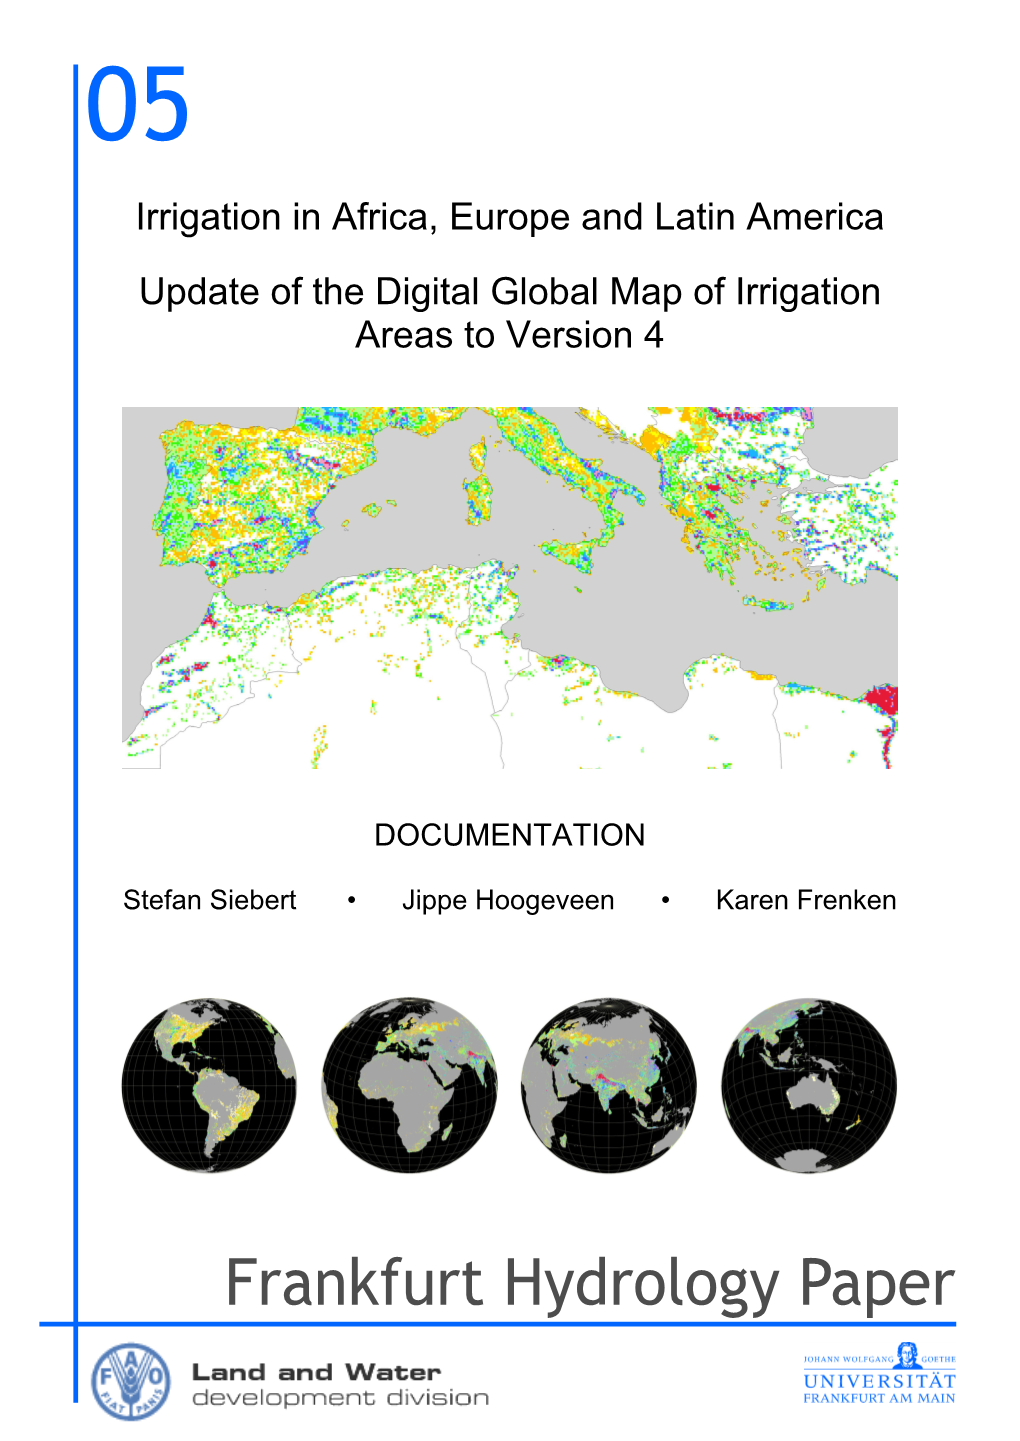 Irrigation in Africa, Europe and Latin America. Update of the Digital